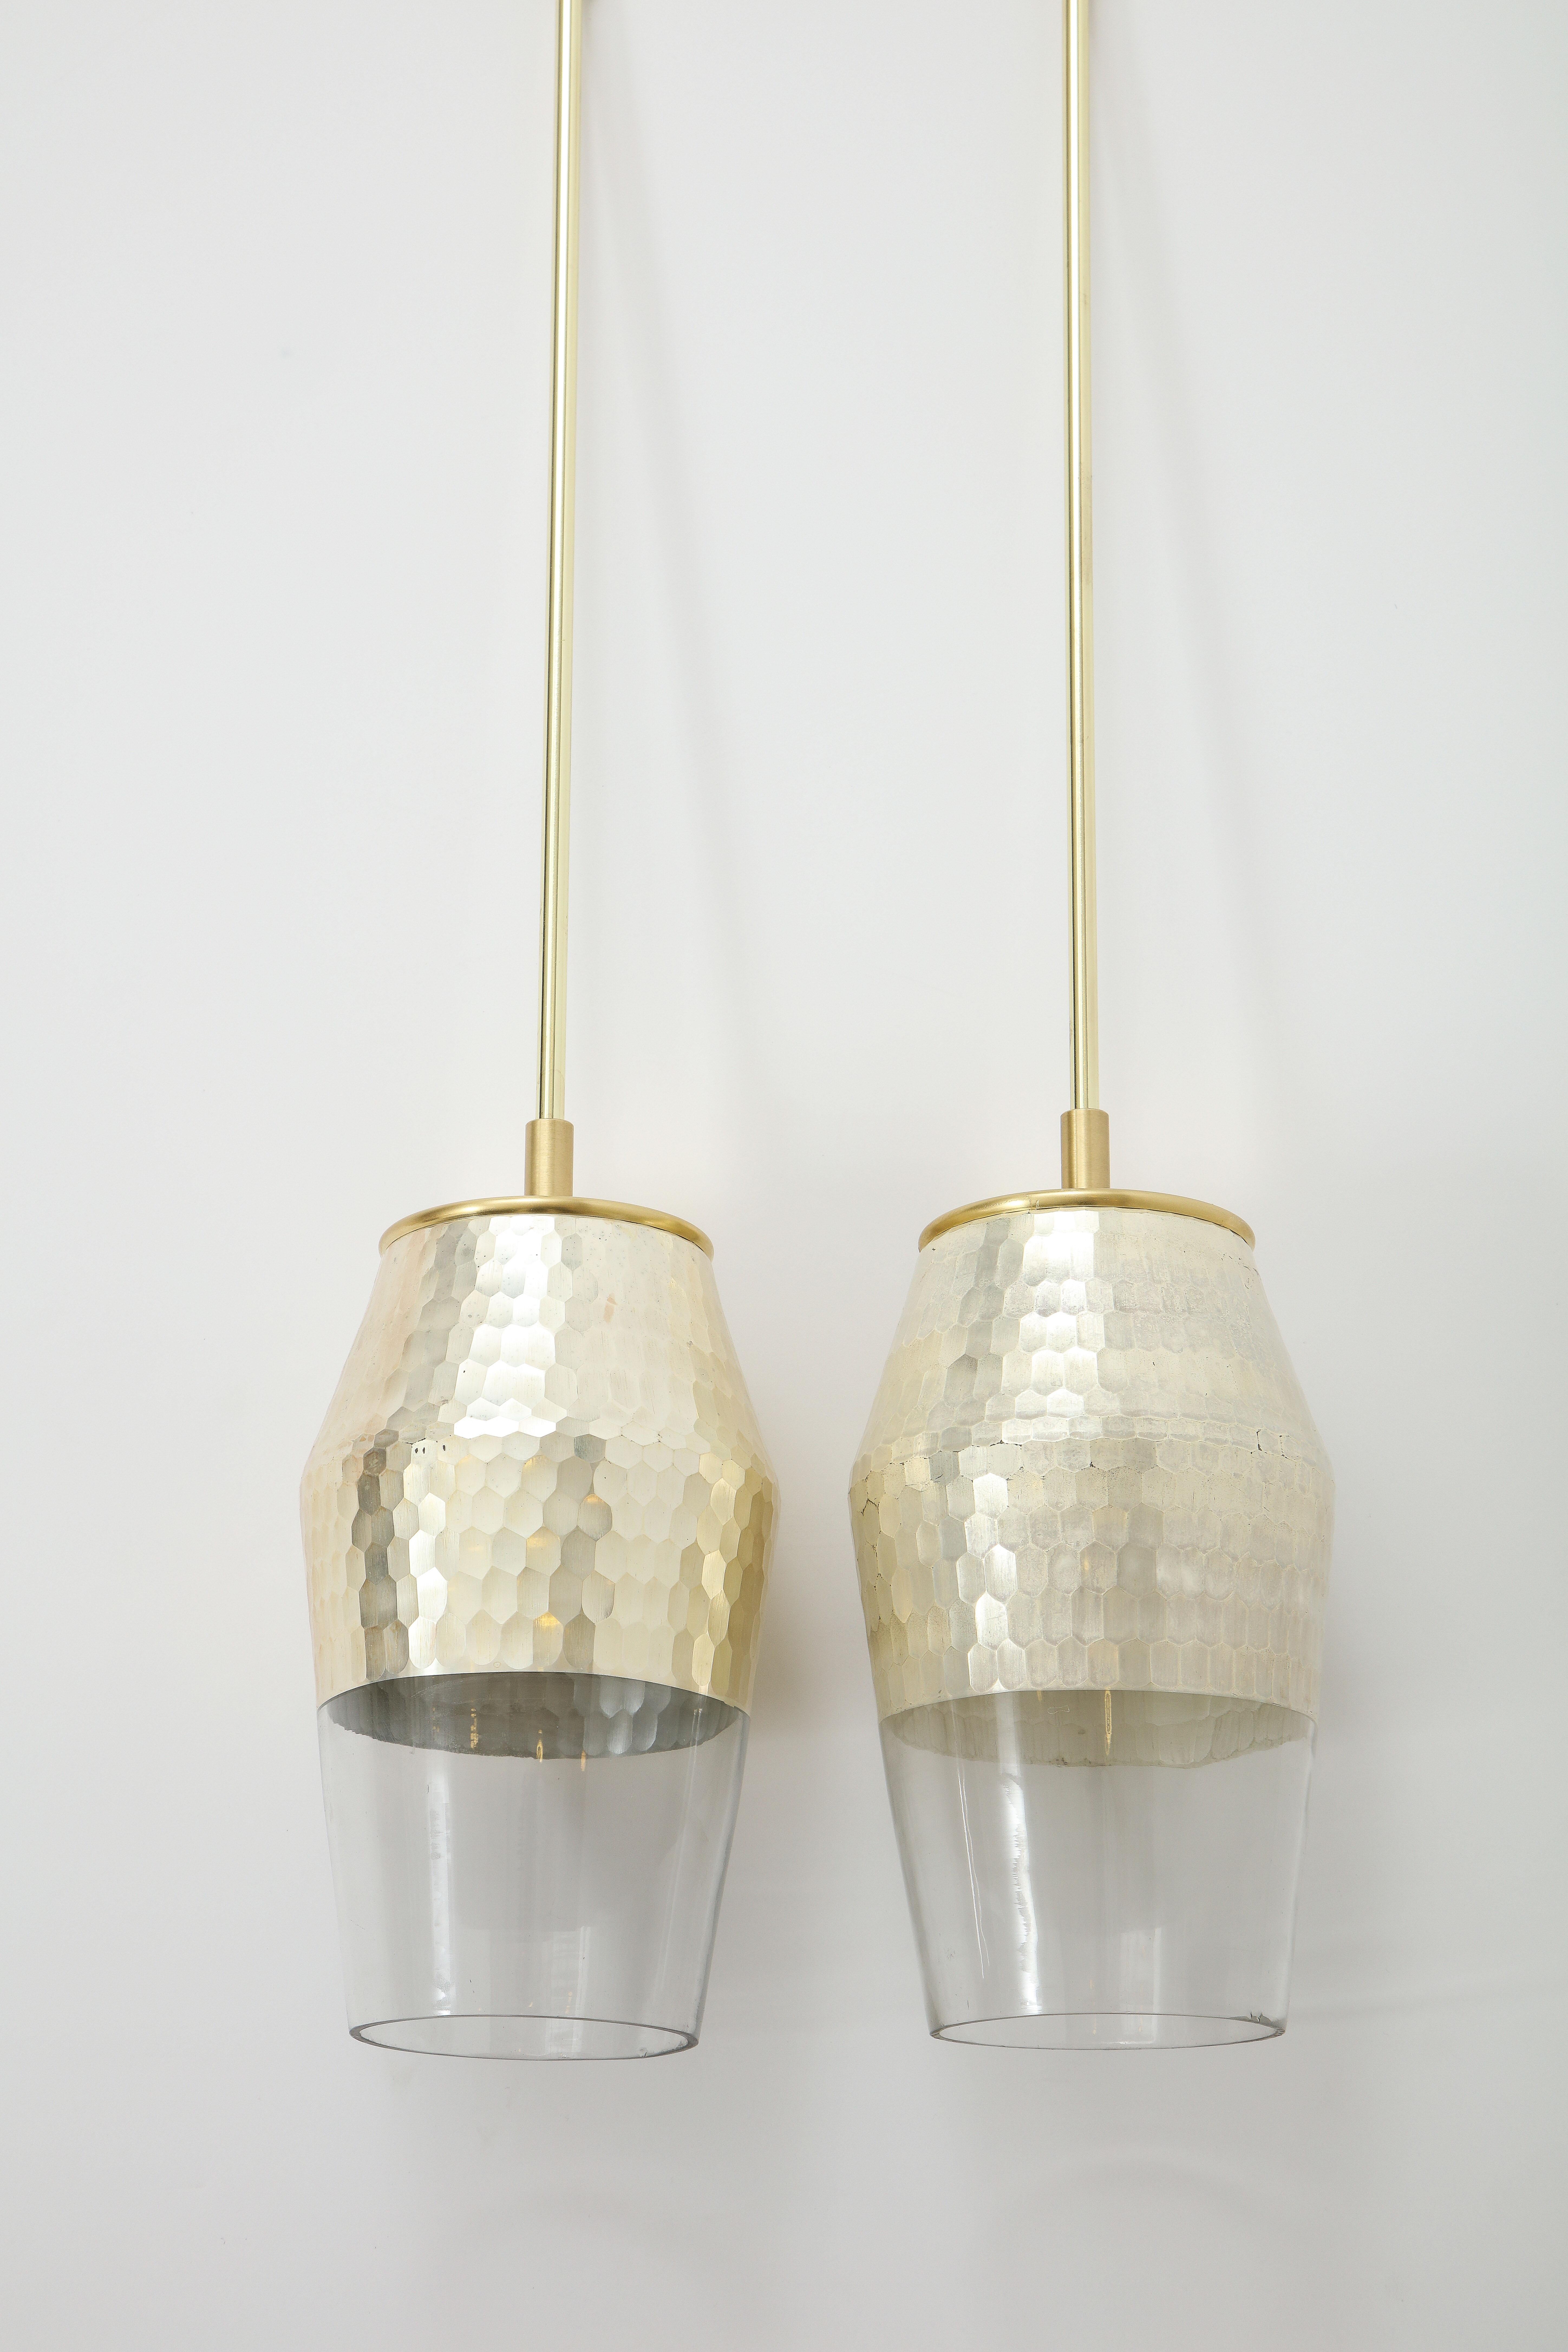 Pair of pendant lights with a Honeycomb textured finish and glazed silver leaf interior.
The polished brass pendants have been newly rewired and take a standard size light bulb
with a 60 Watt maximum.
The rod is 16